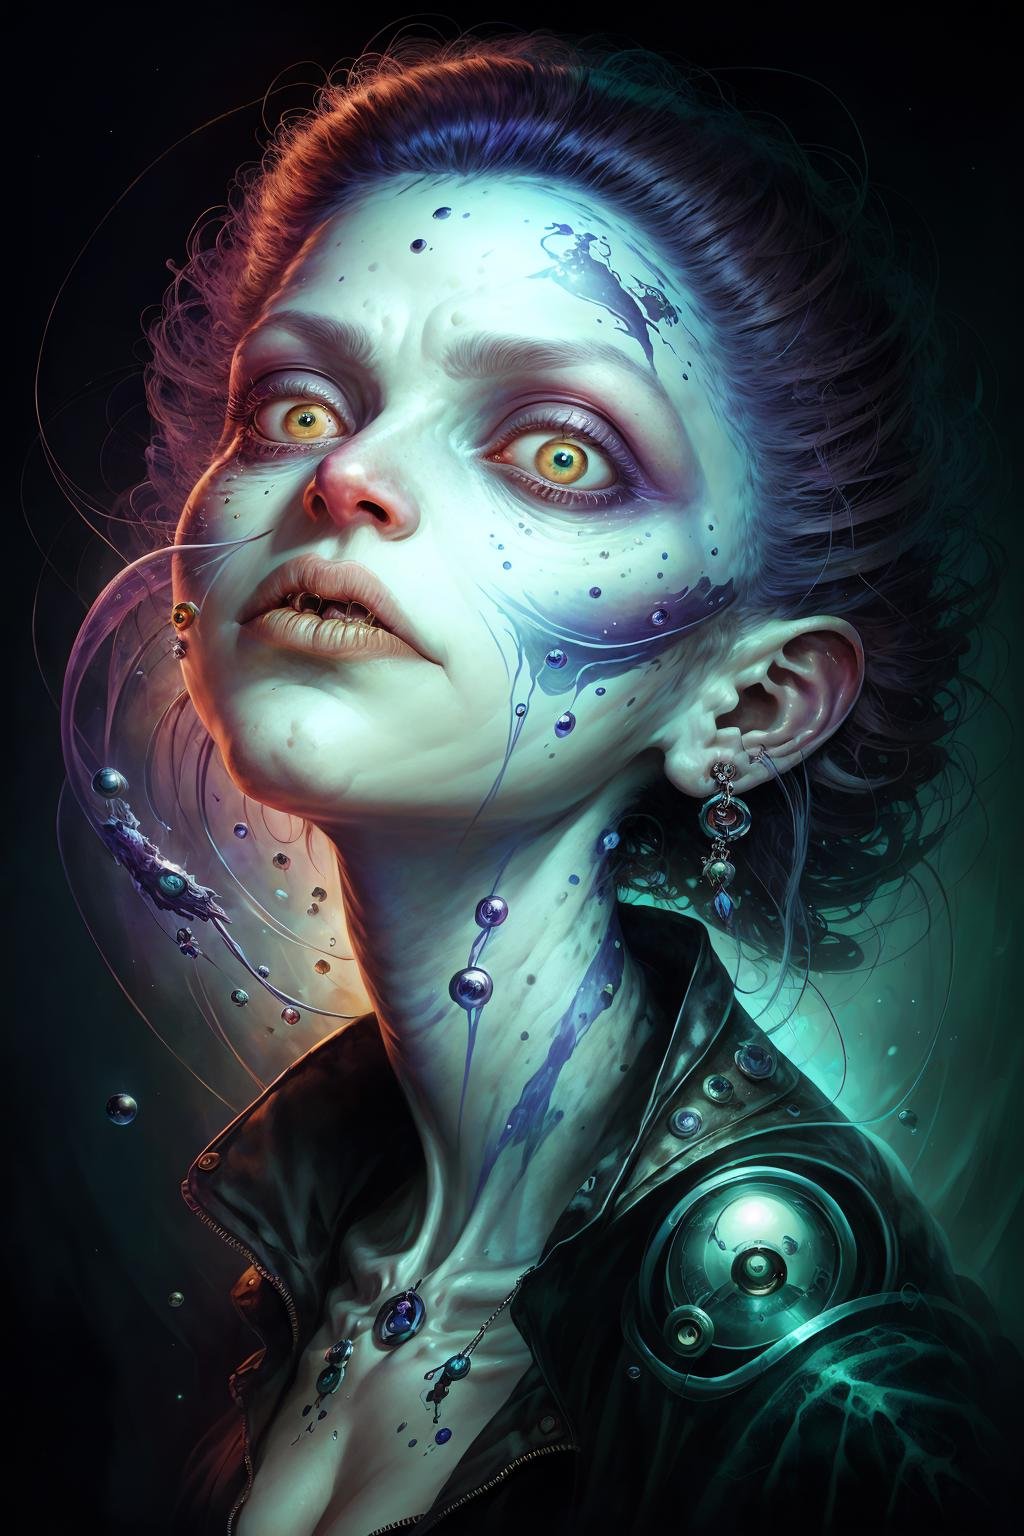 In the style of both Alejandro Burdisio and Aleksi Briclot, a close-up poster featuring a (woman with expressive eyes:1.2) caught in a digital light symphony of (random shapes creating a mesmerizing void:0.8), where the interplay between their artistic visions accentuates her allure and enigma, monsters00d  <lora:monsters00d:0.9>